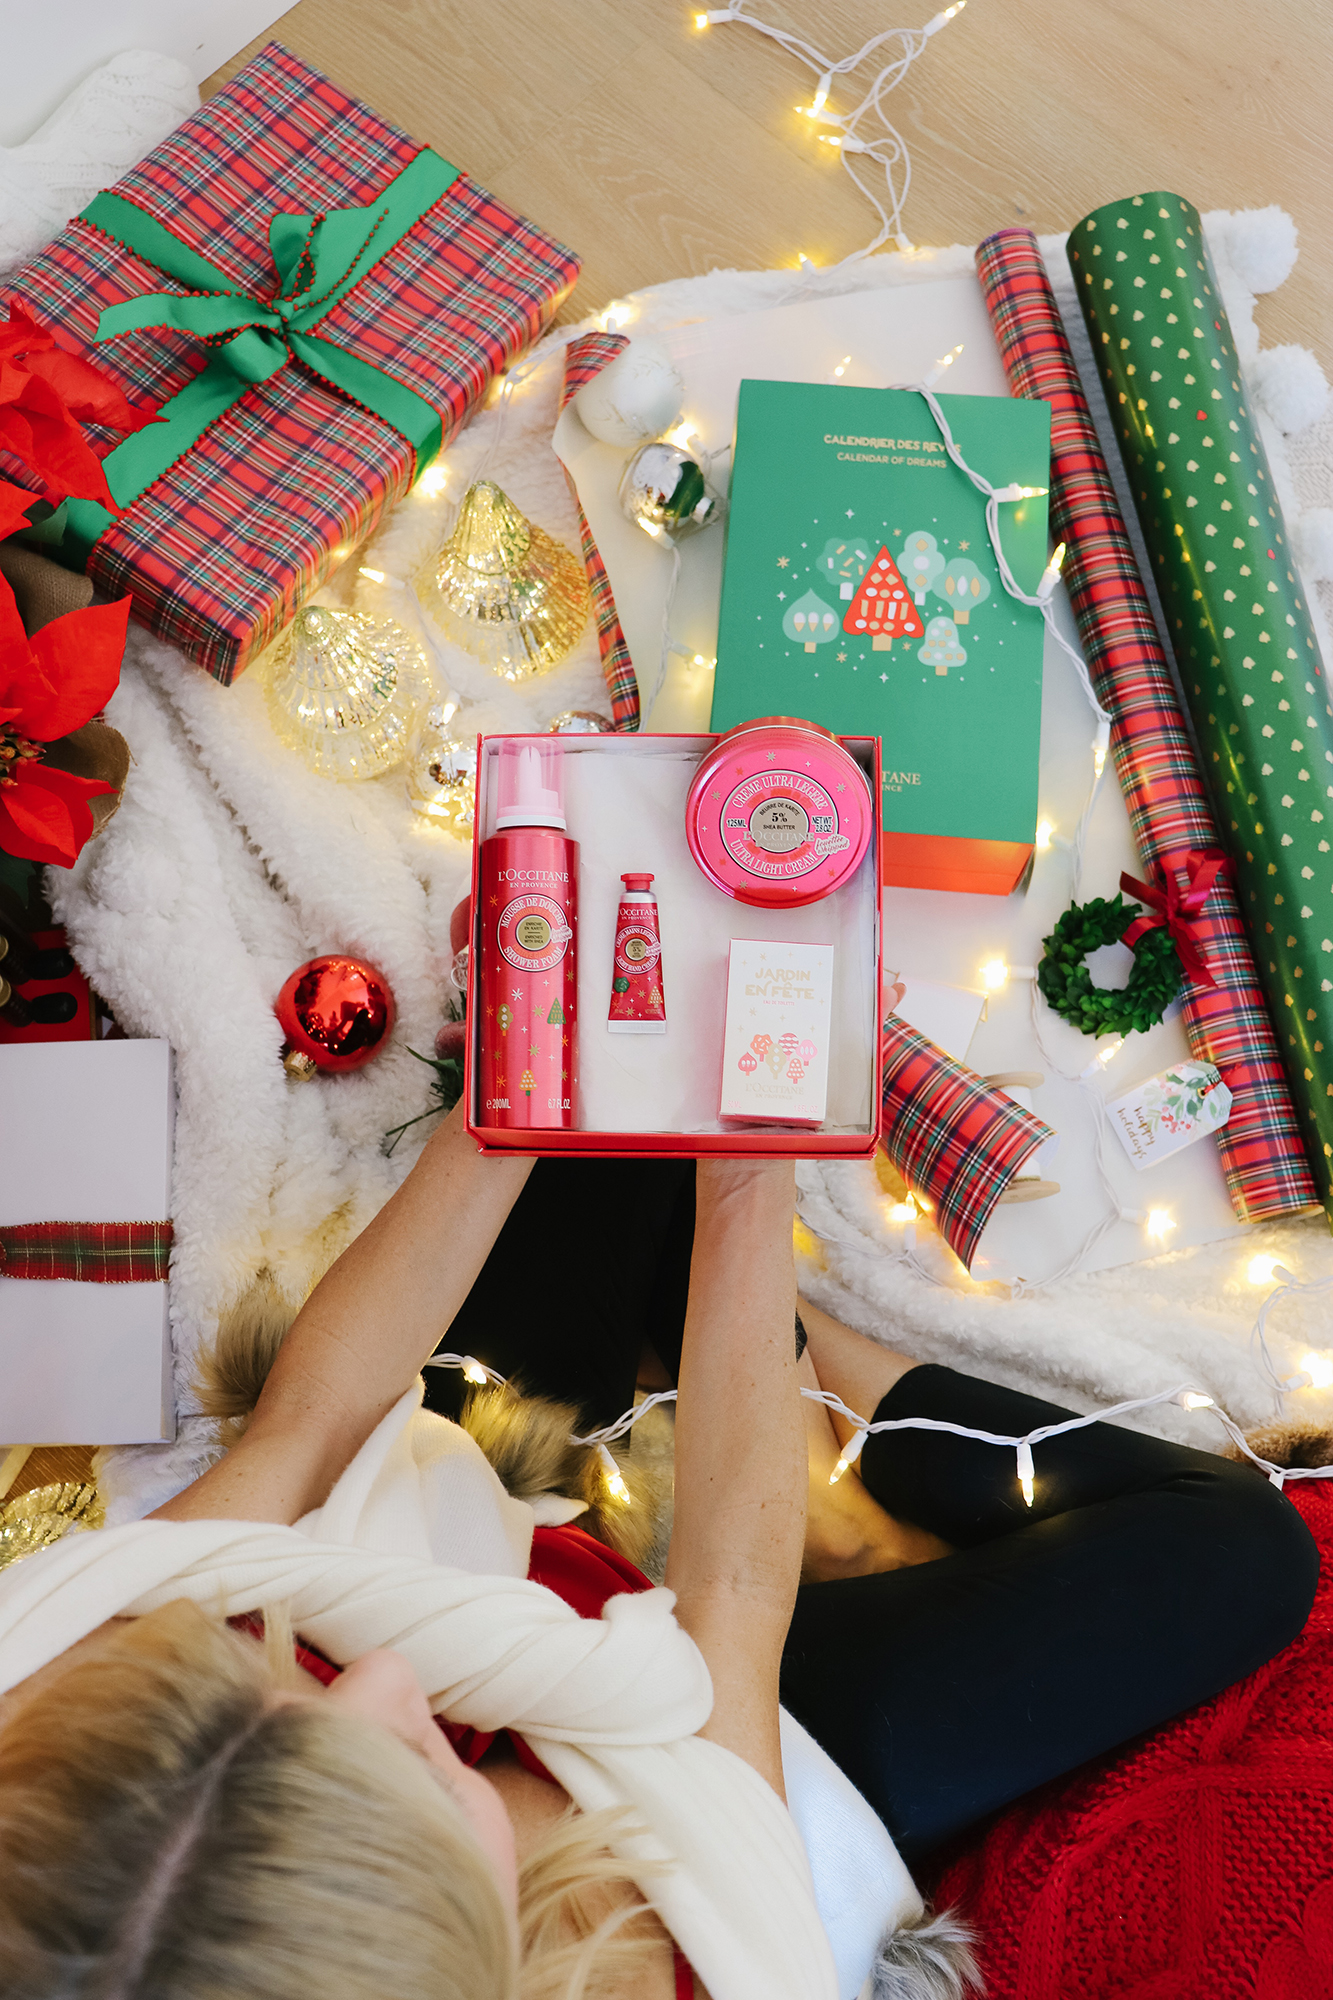 Holiday Beauty Gift Set Guide - L'Occitane 